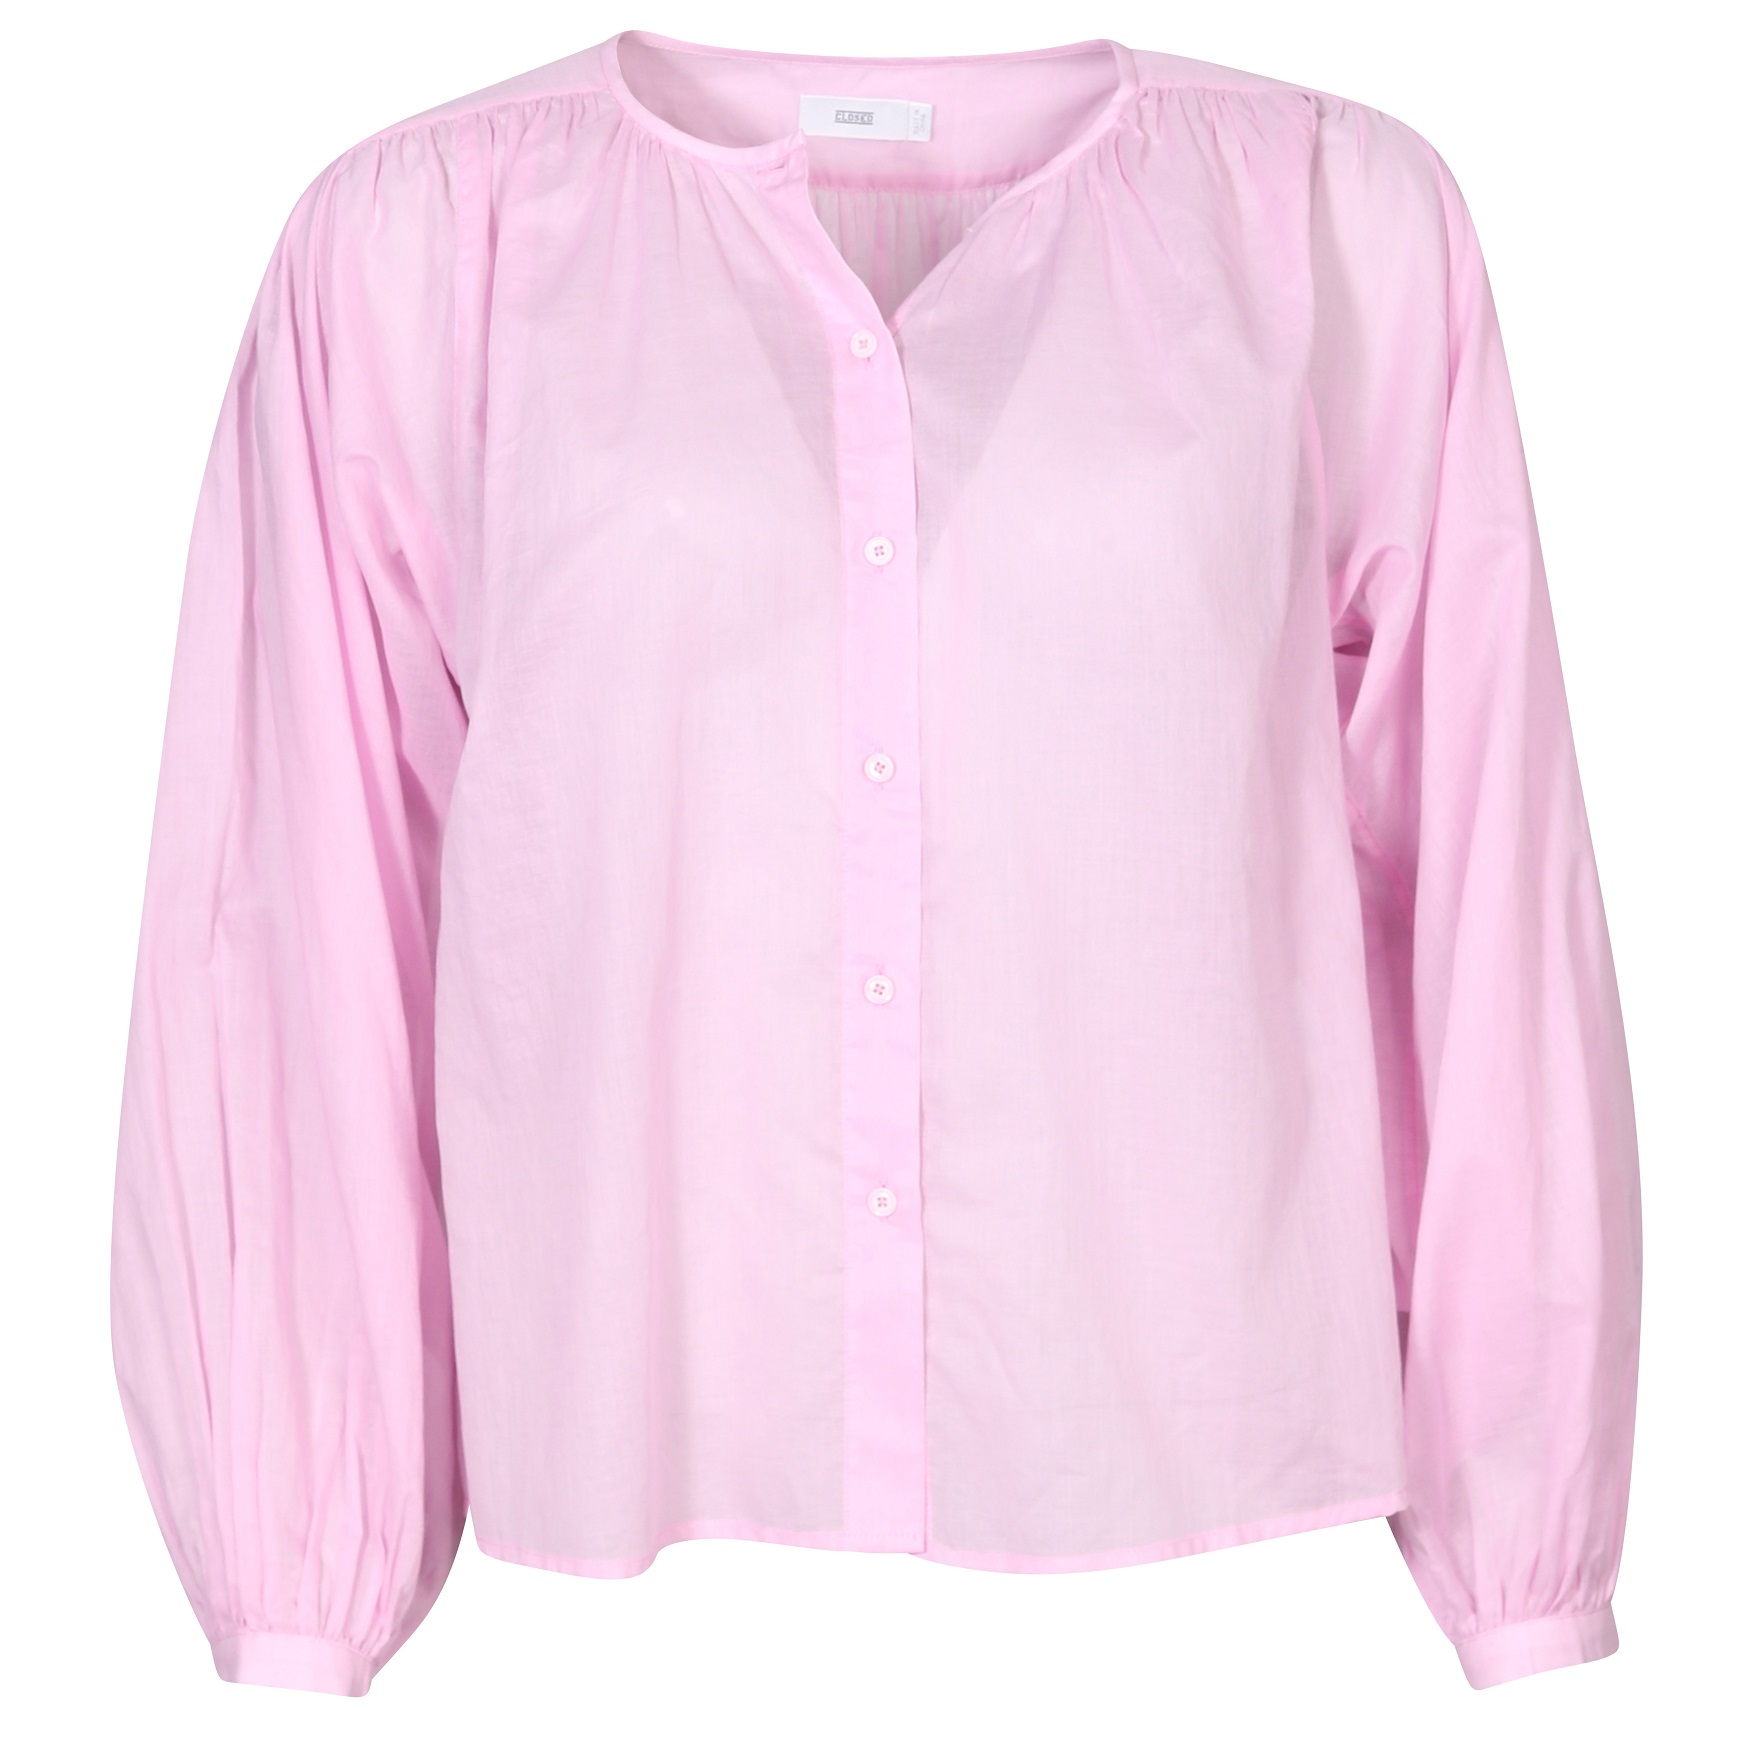 CLOSED Gathered Shirt in Pink